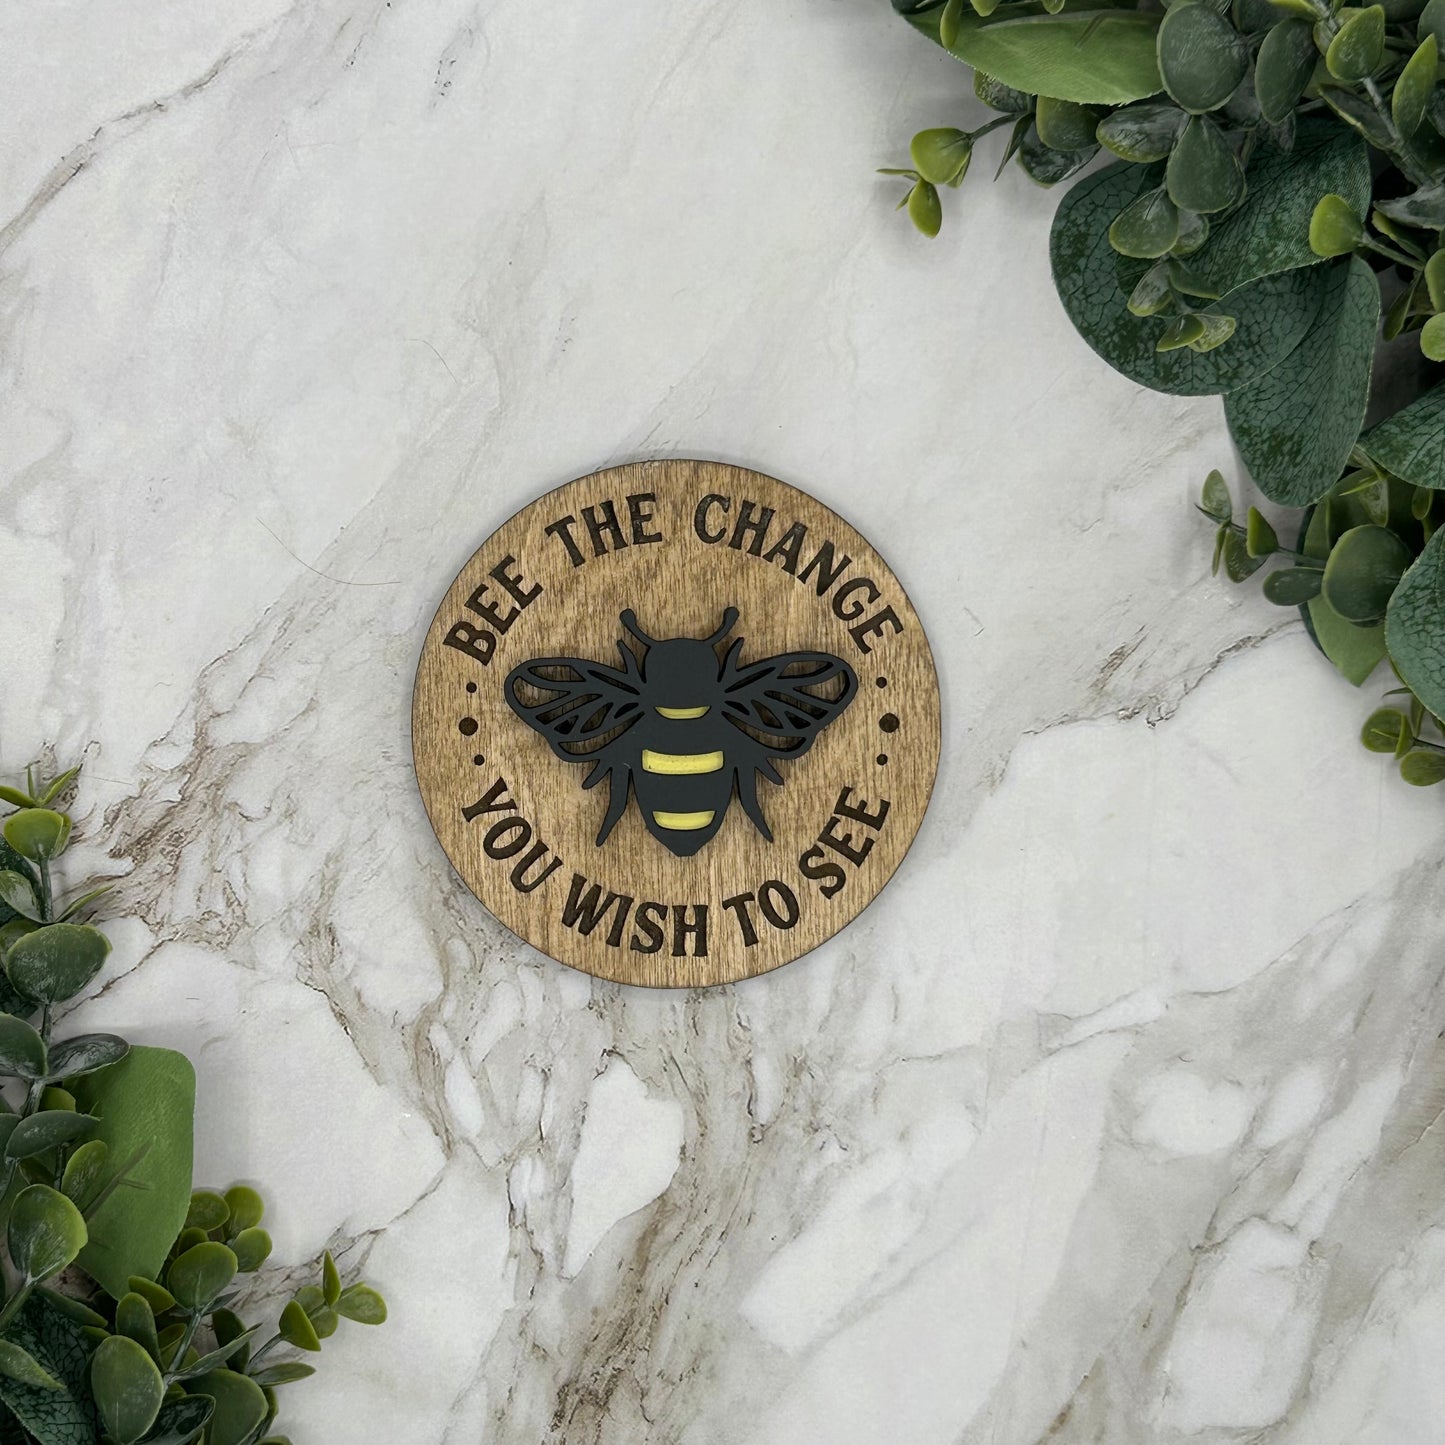 Bee the Change Sign